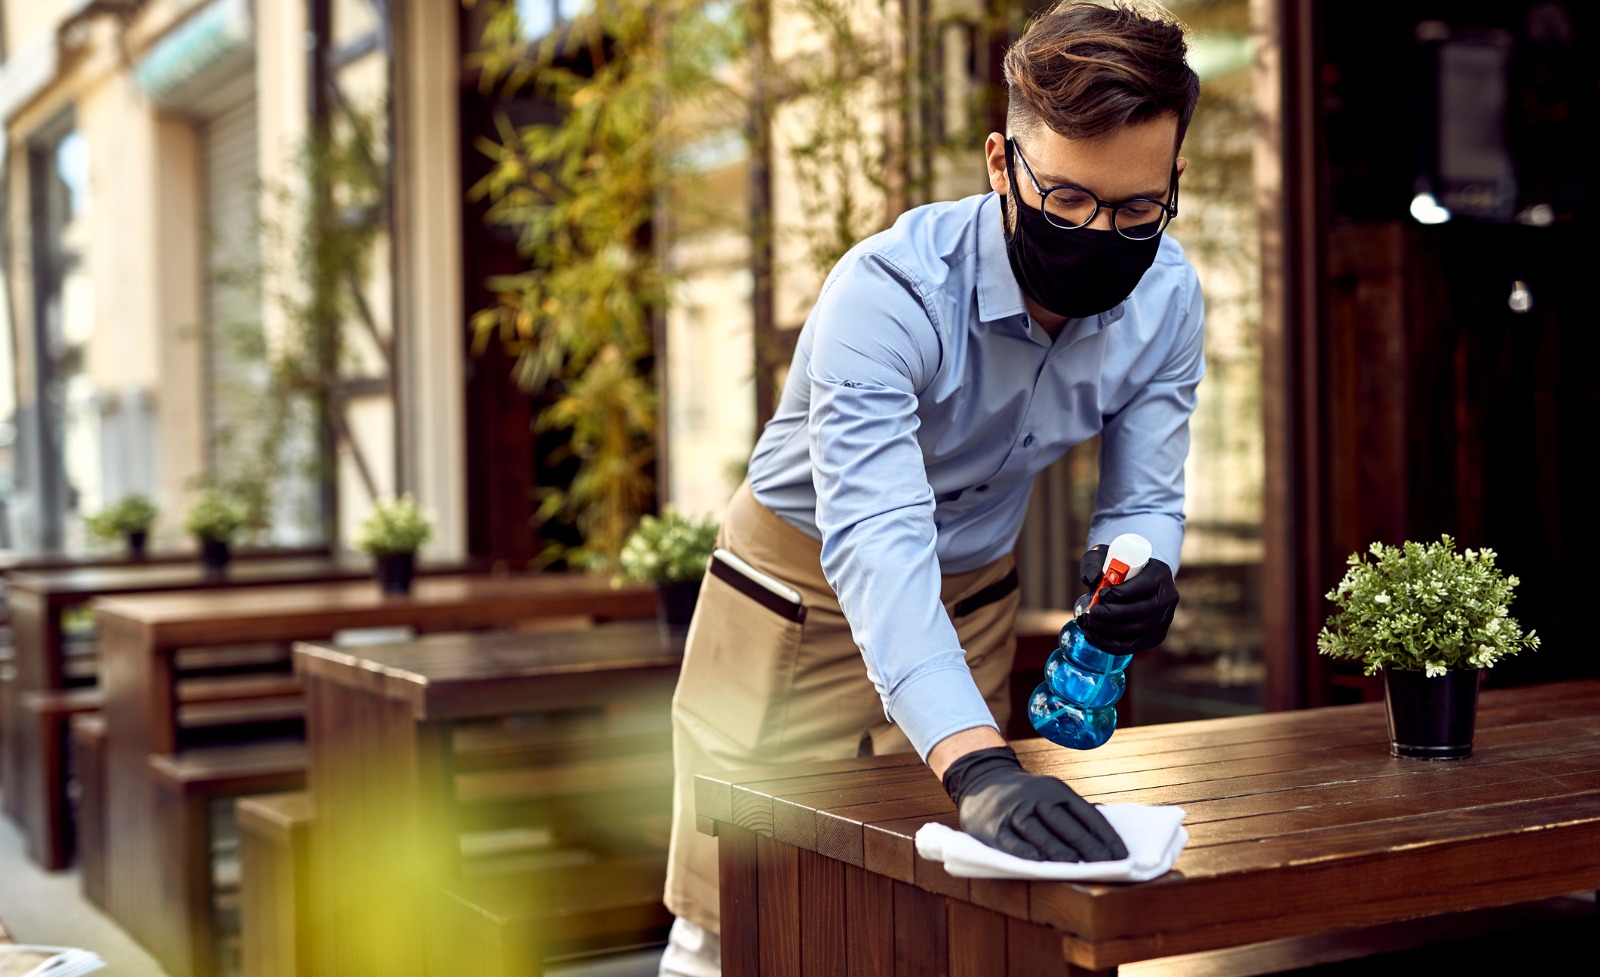 A waiter wearing a mask while cleaning a wooden table